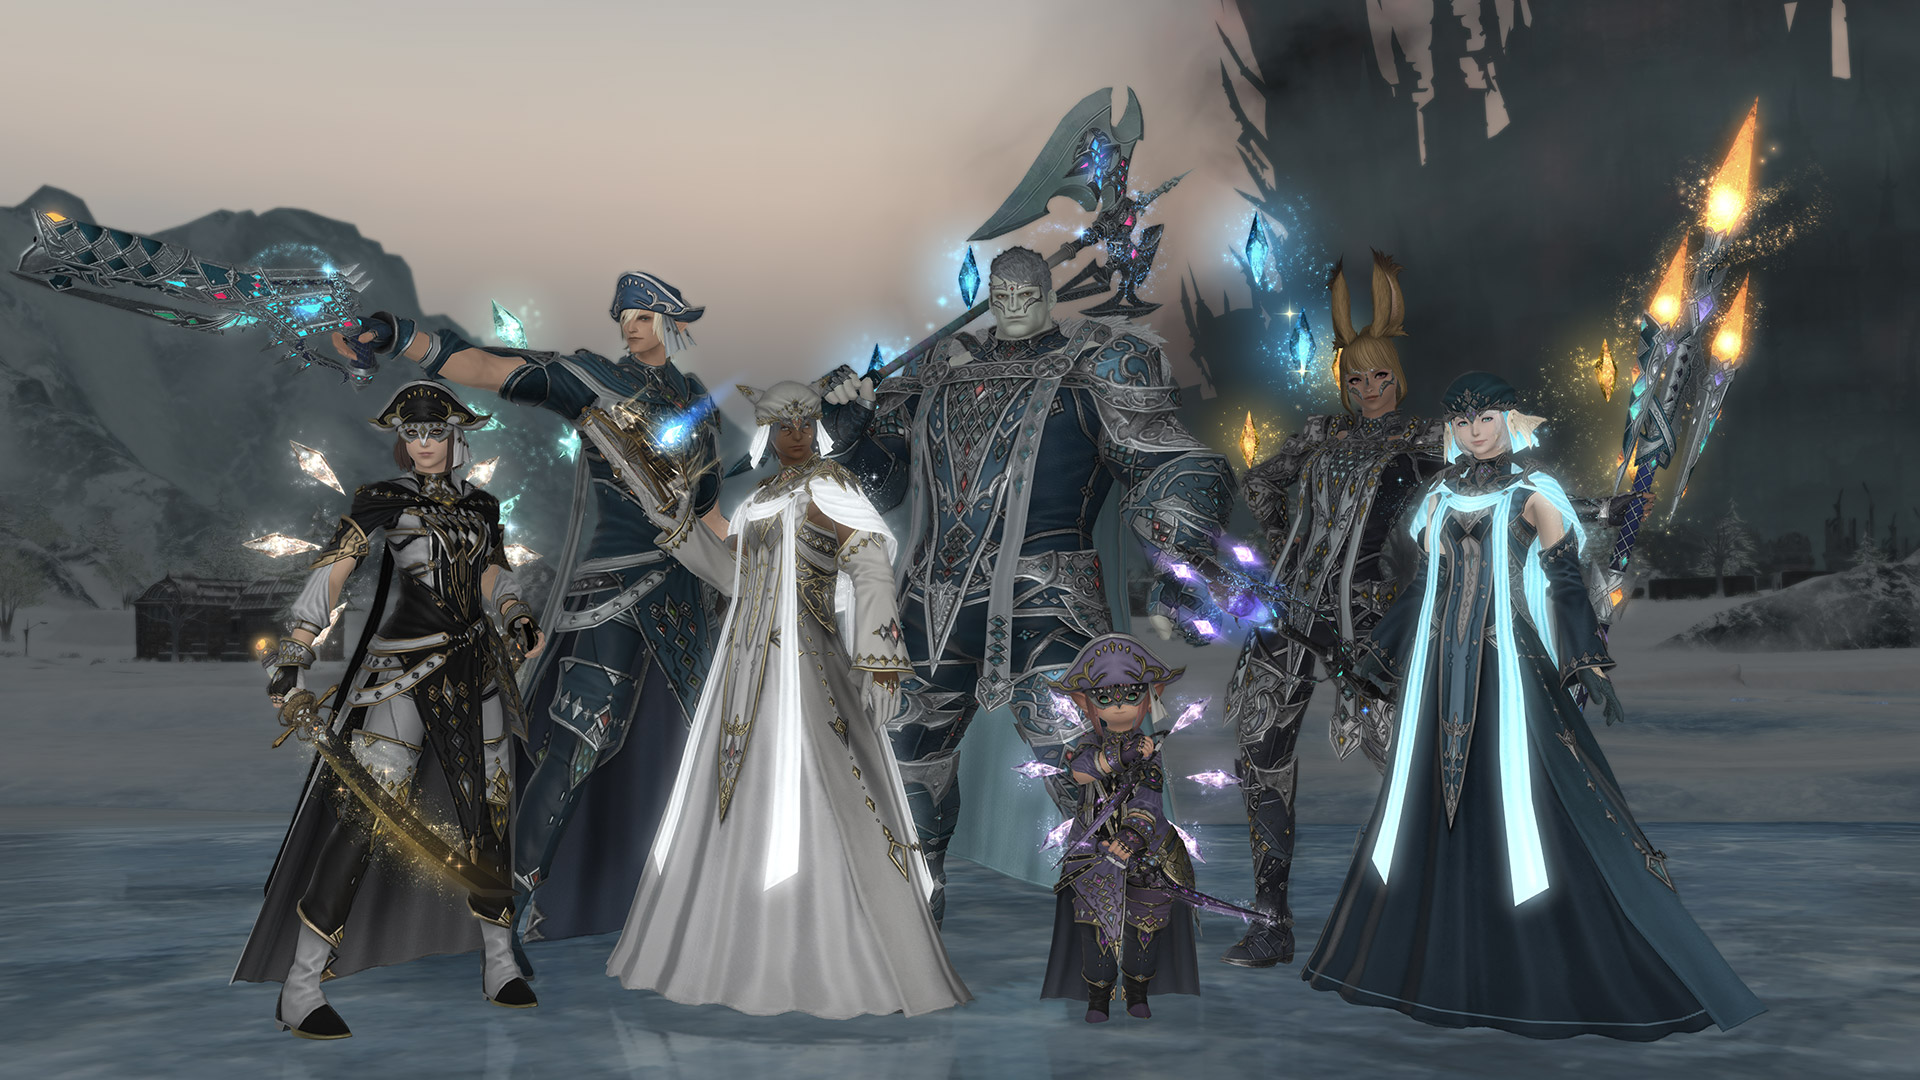 Happy Decade Final Fantasy 14! Japan to collaborate with major